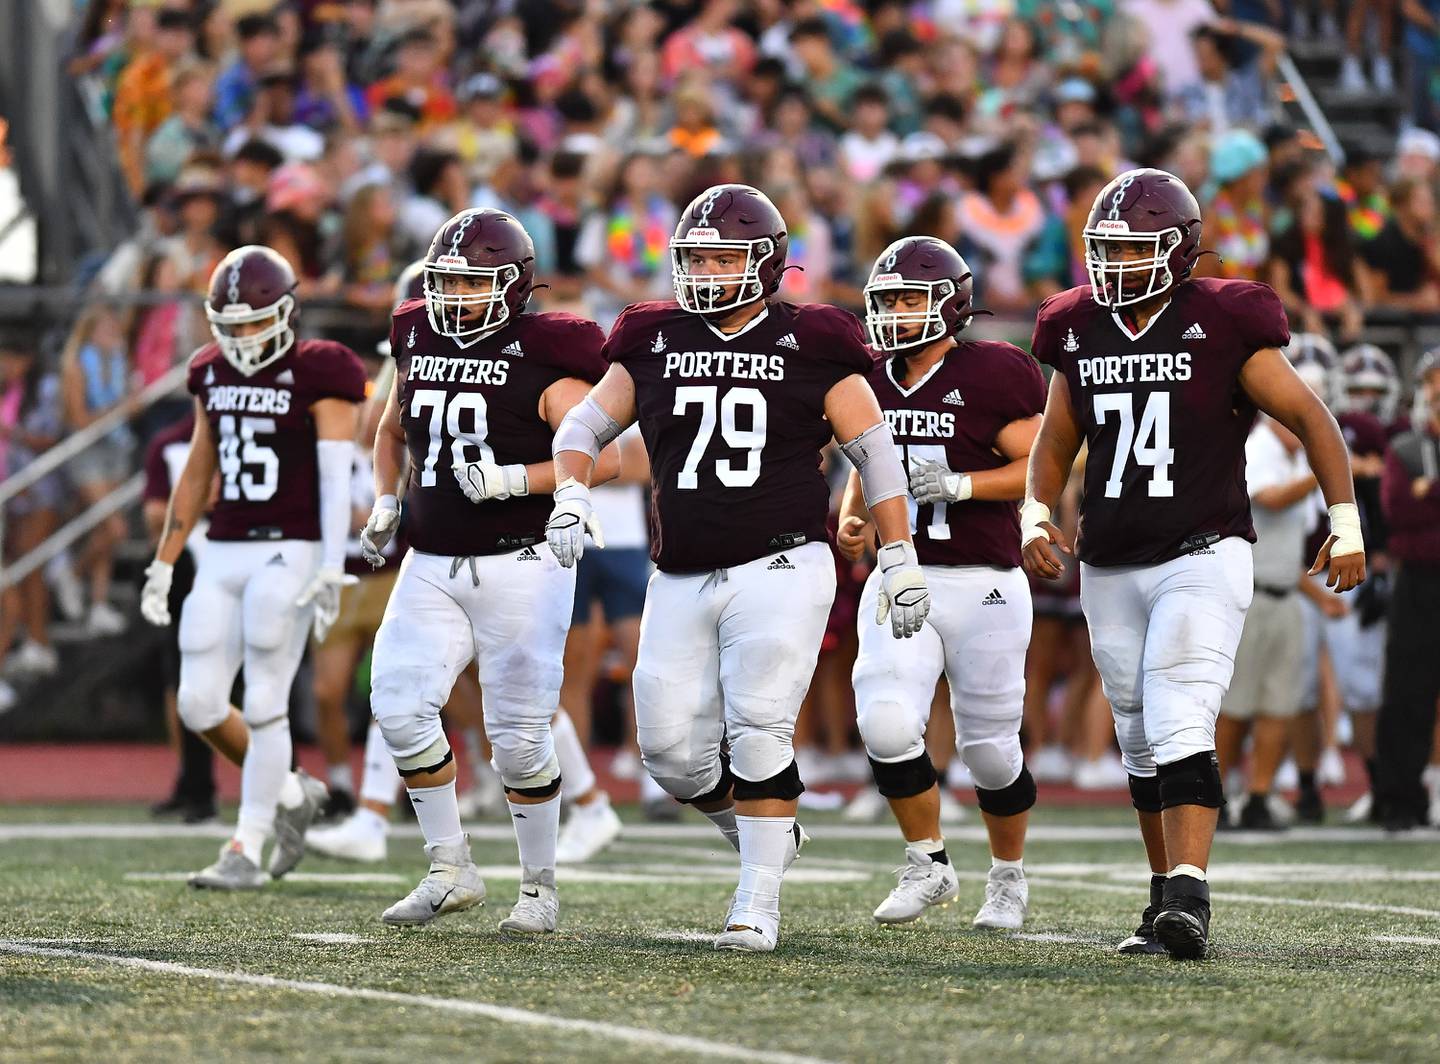 Lockport's offensive linemen coming to the line of scrimmage  during the non-conference game between Lockport and Joliet West on Friday, Aug. 26, 2022, at Lockport High School in Lockport.